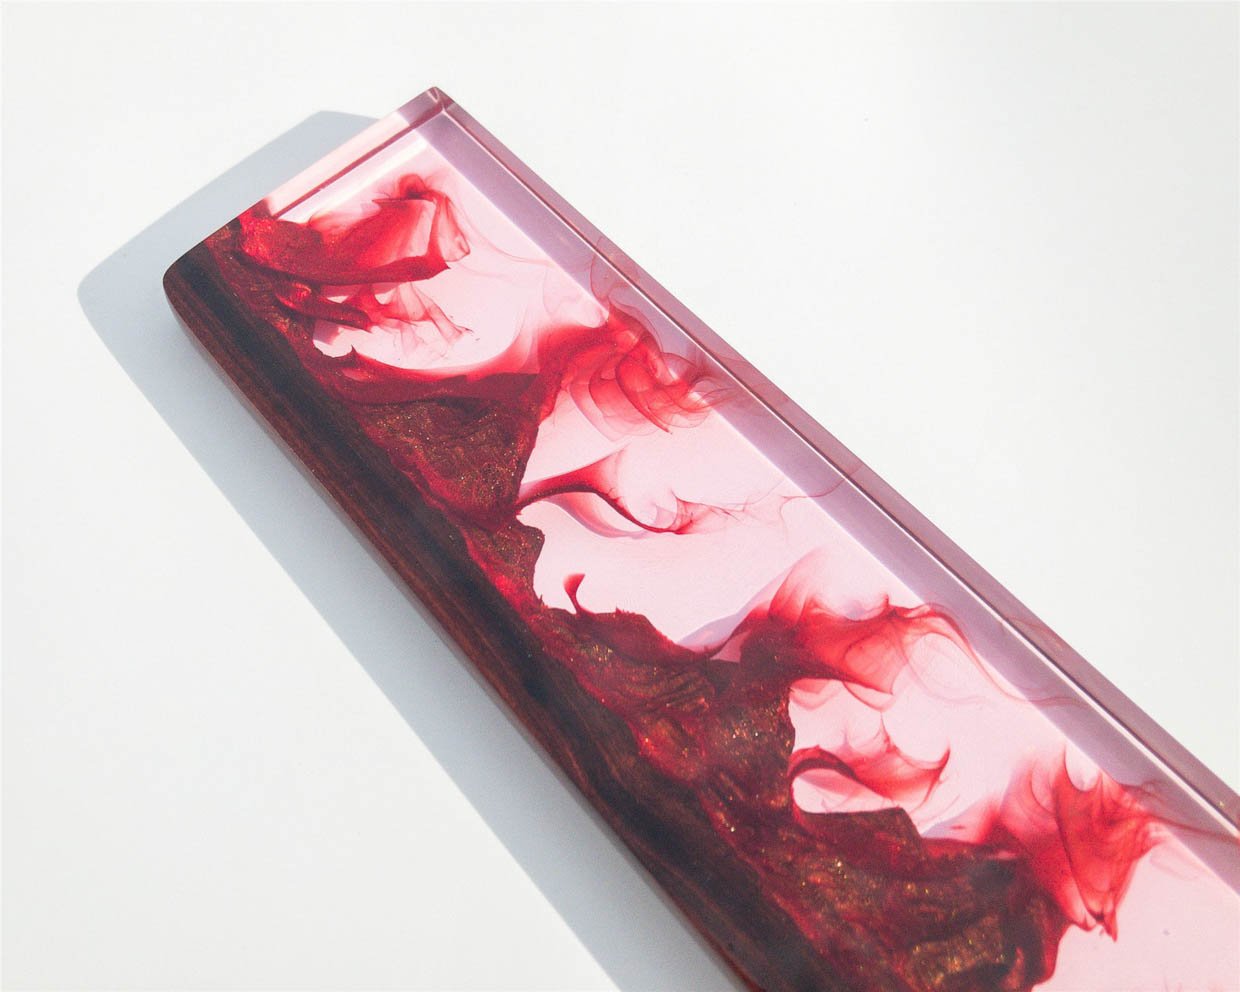 Resin and Wood Wrist Rests